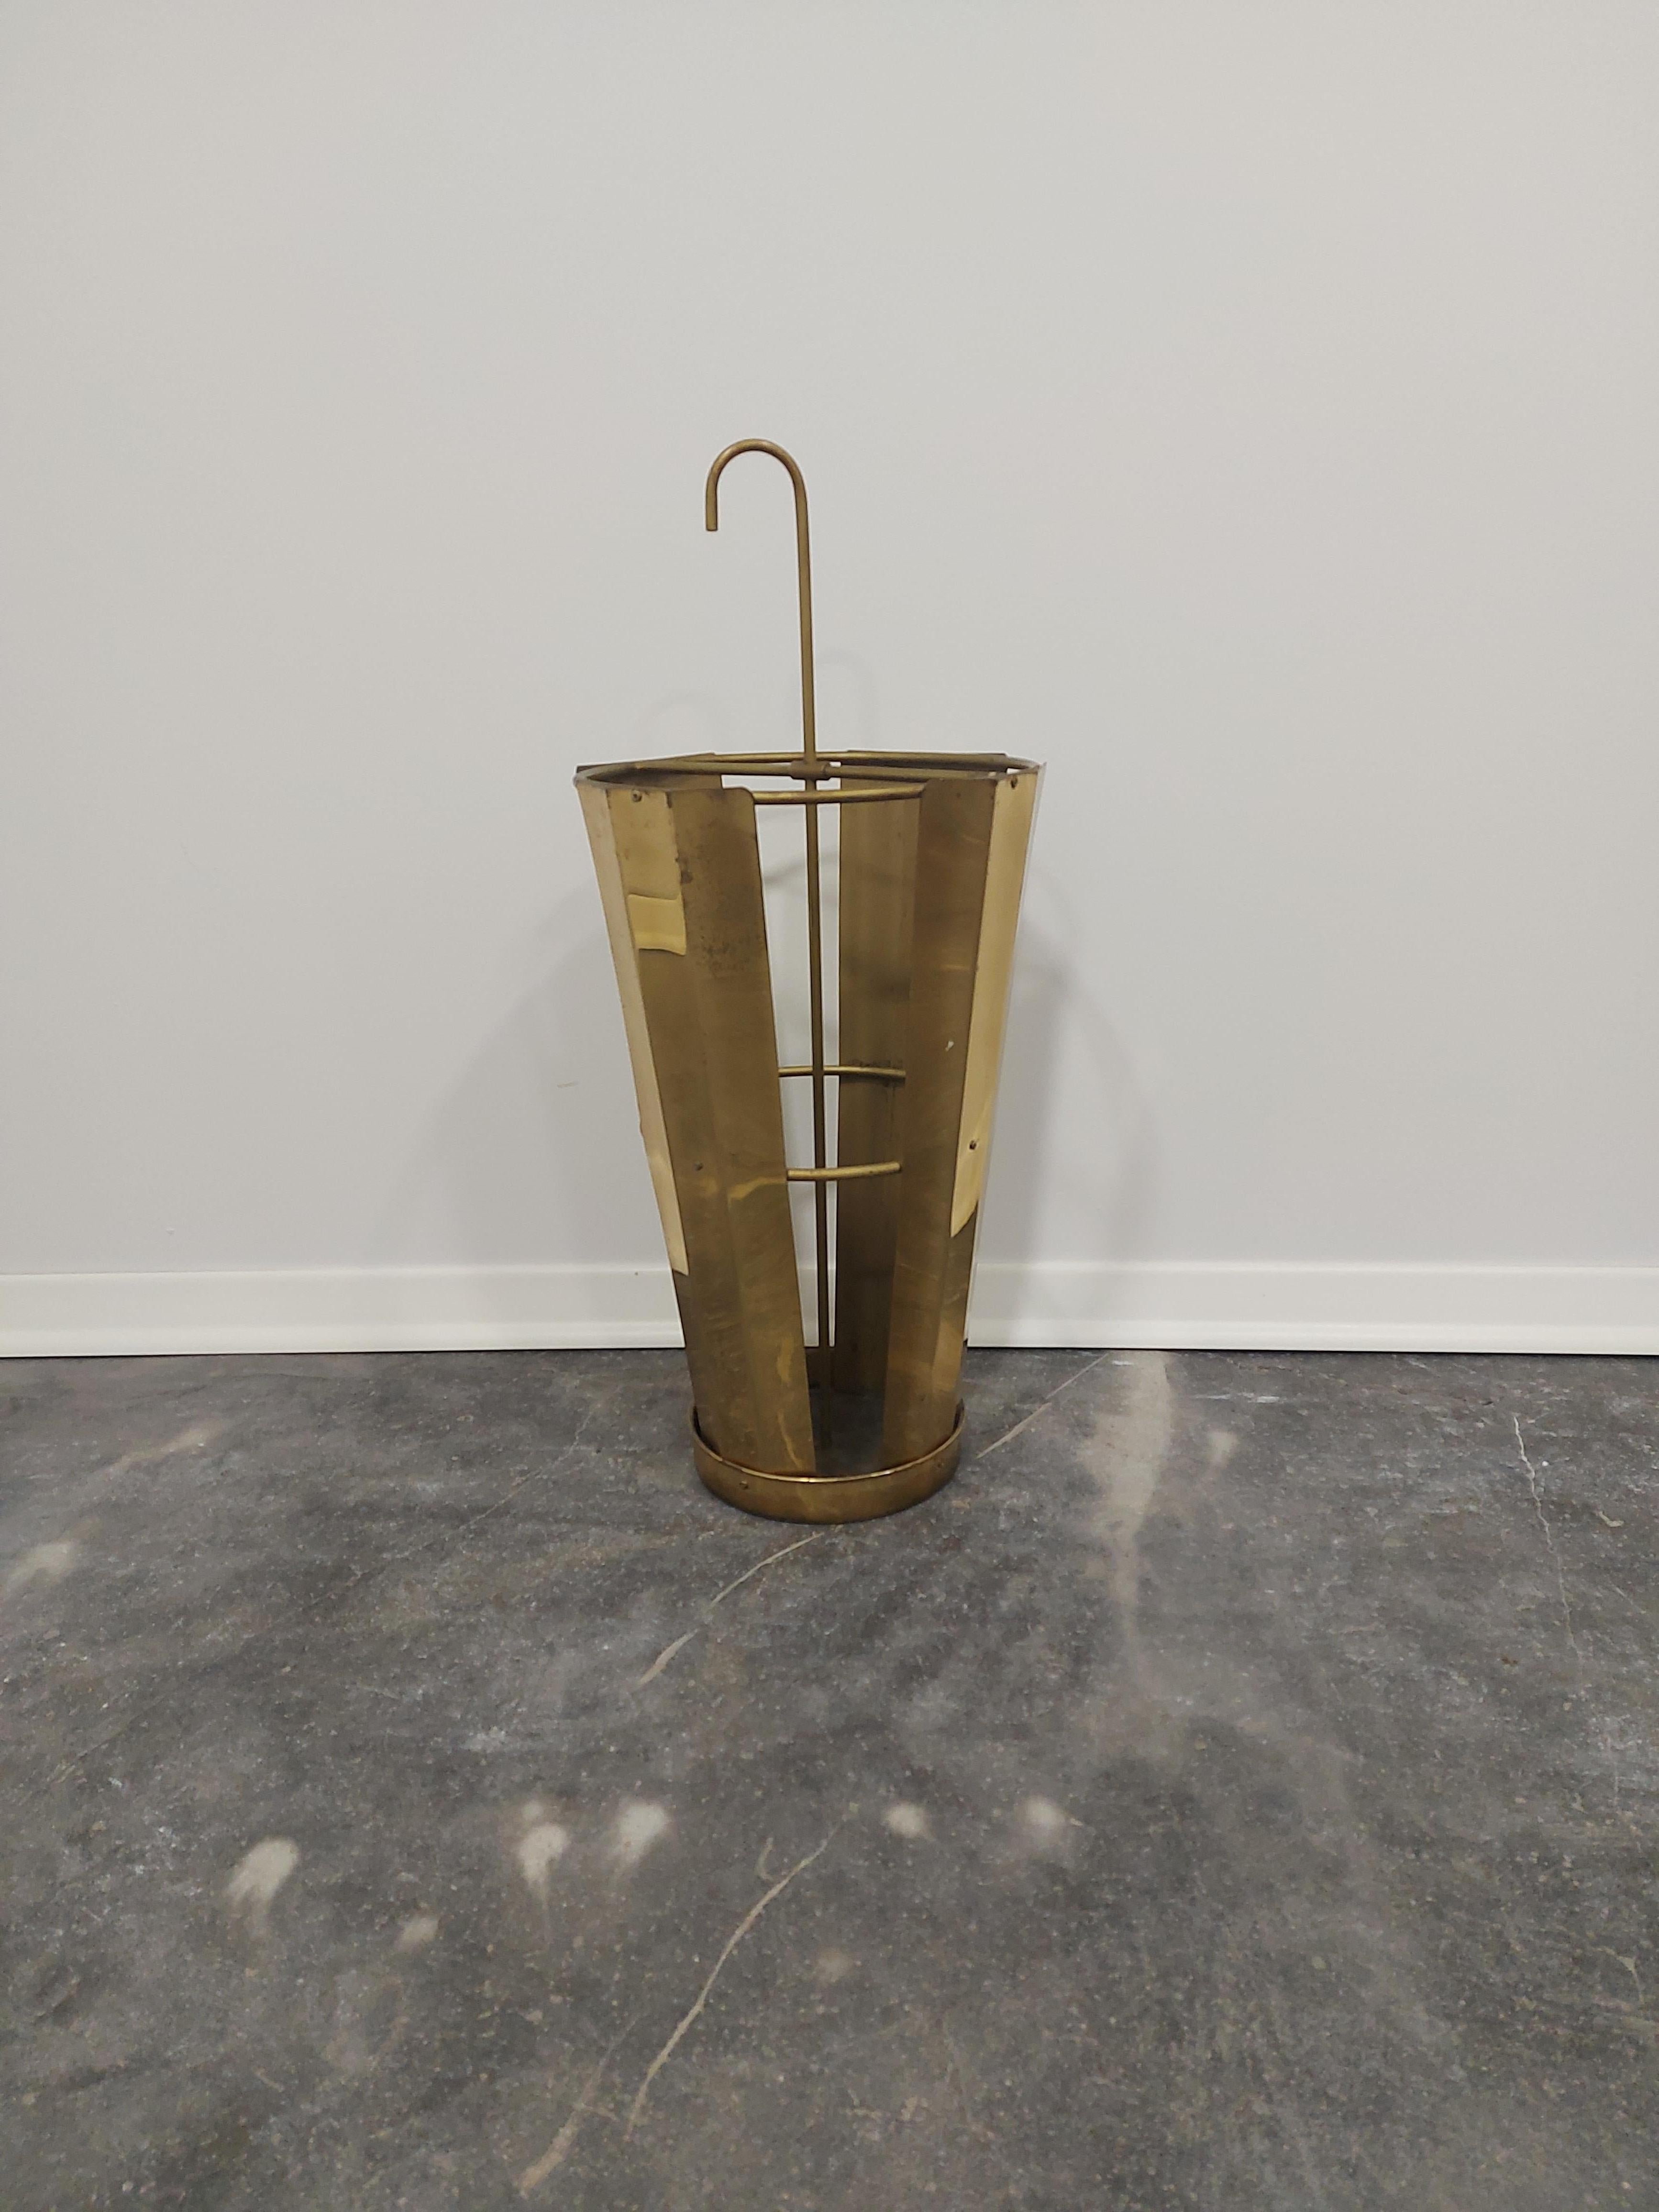 Unique Umbrella Stand, 1960s.

Beautiful Vintage patina.

Condition: Great

Material: Brass.

Measures: height cm - 68, width - 31 cm.